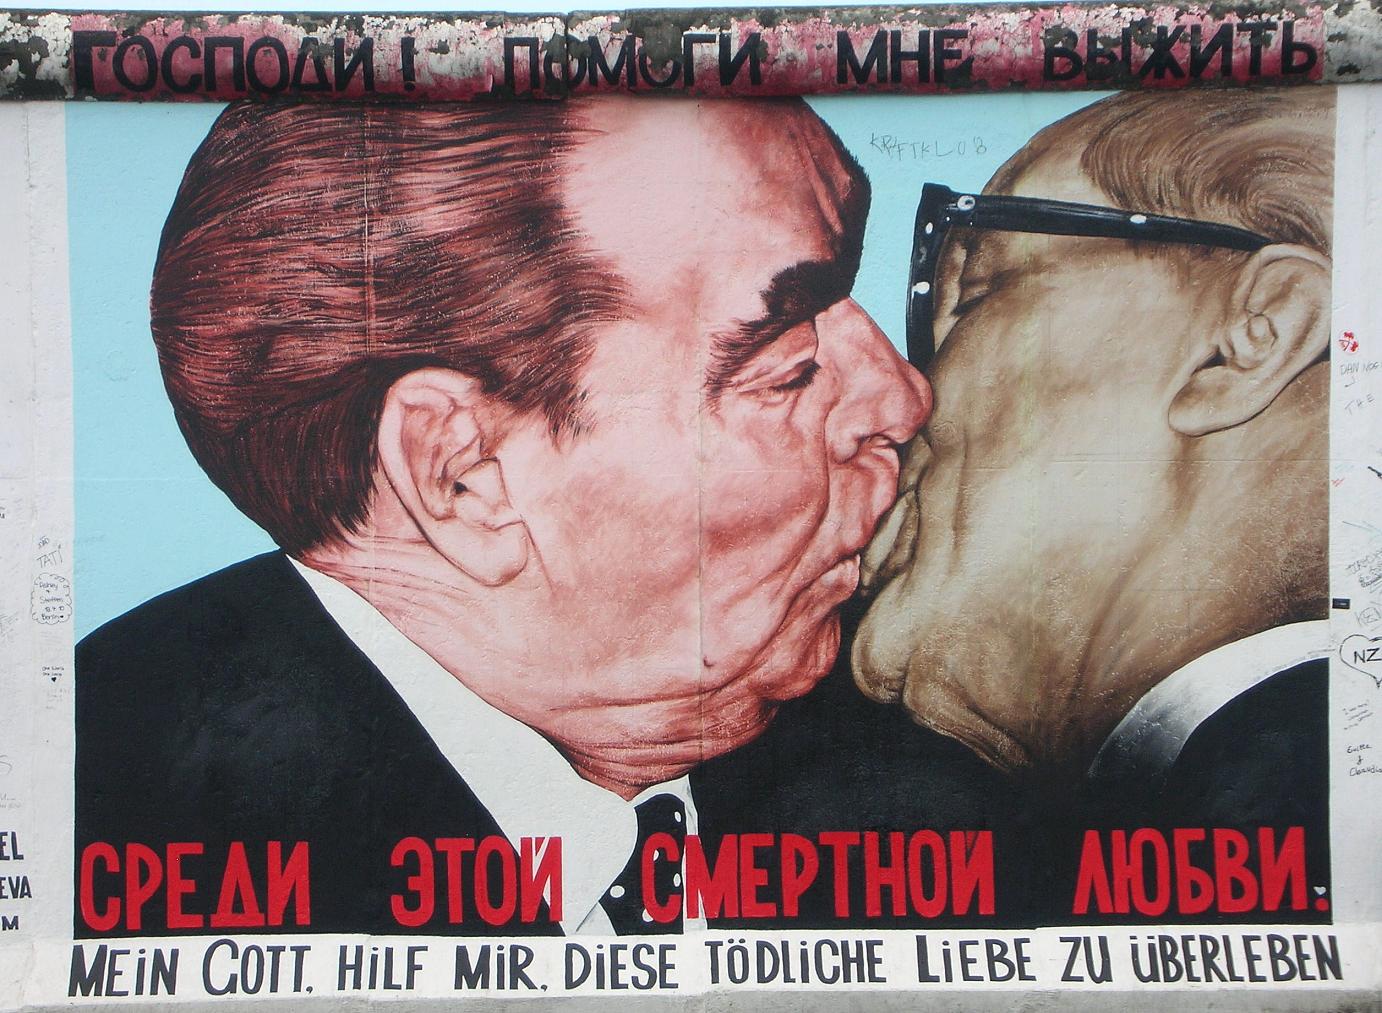 The Wall: Breshniev and Honnecker locked in a fraternal kiss.